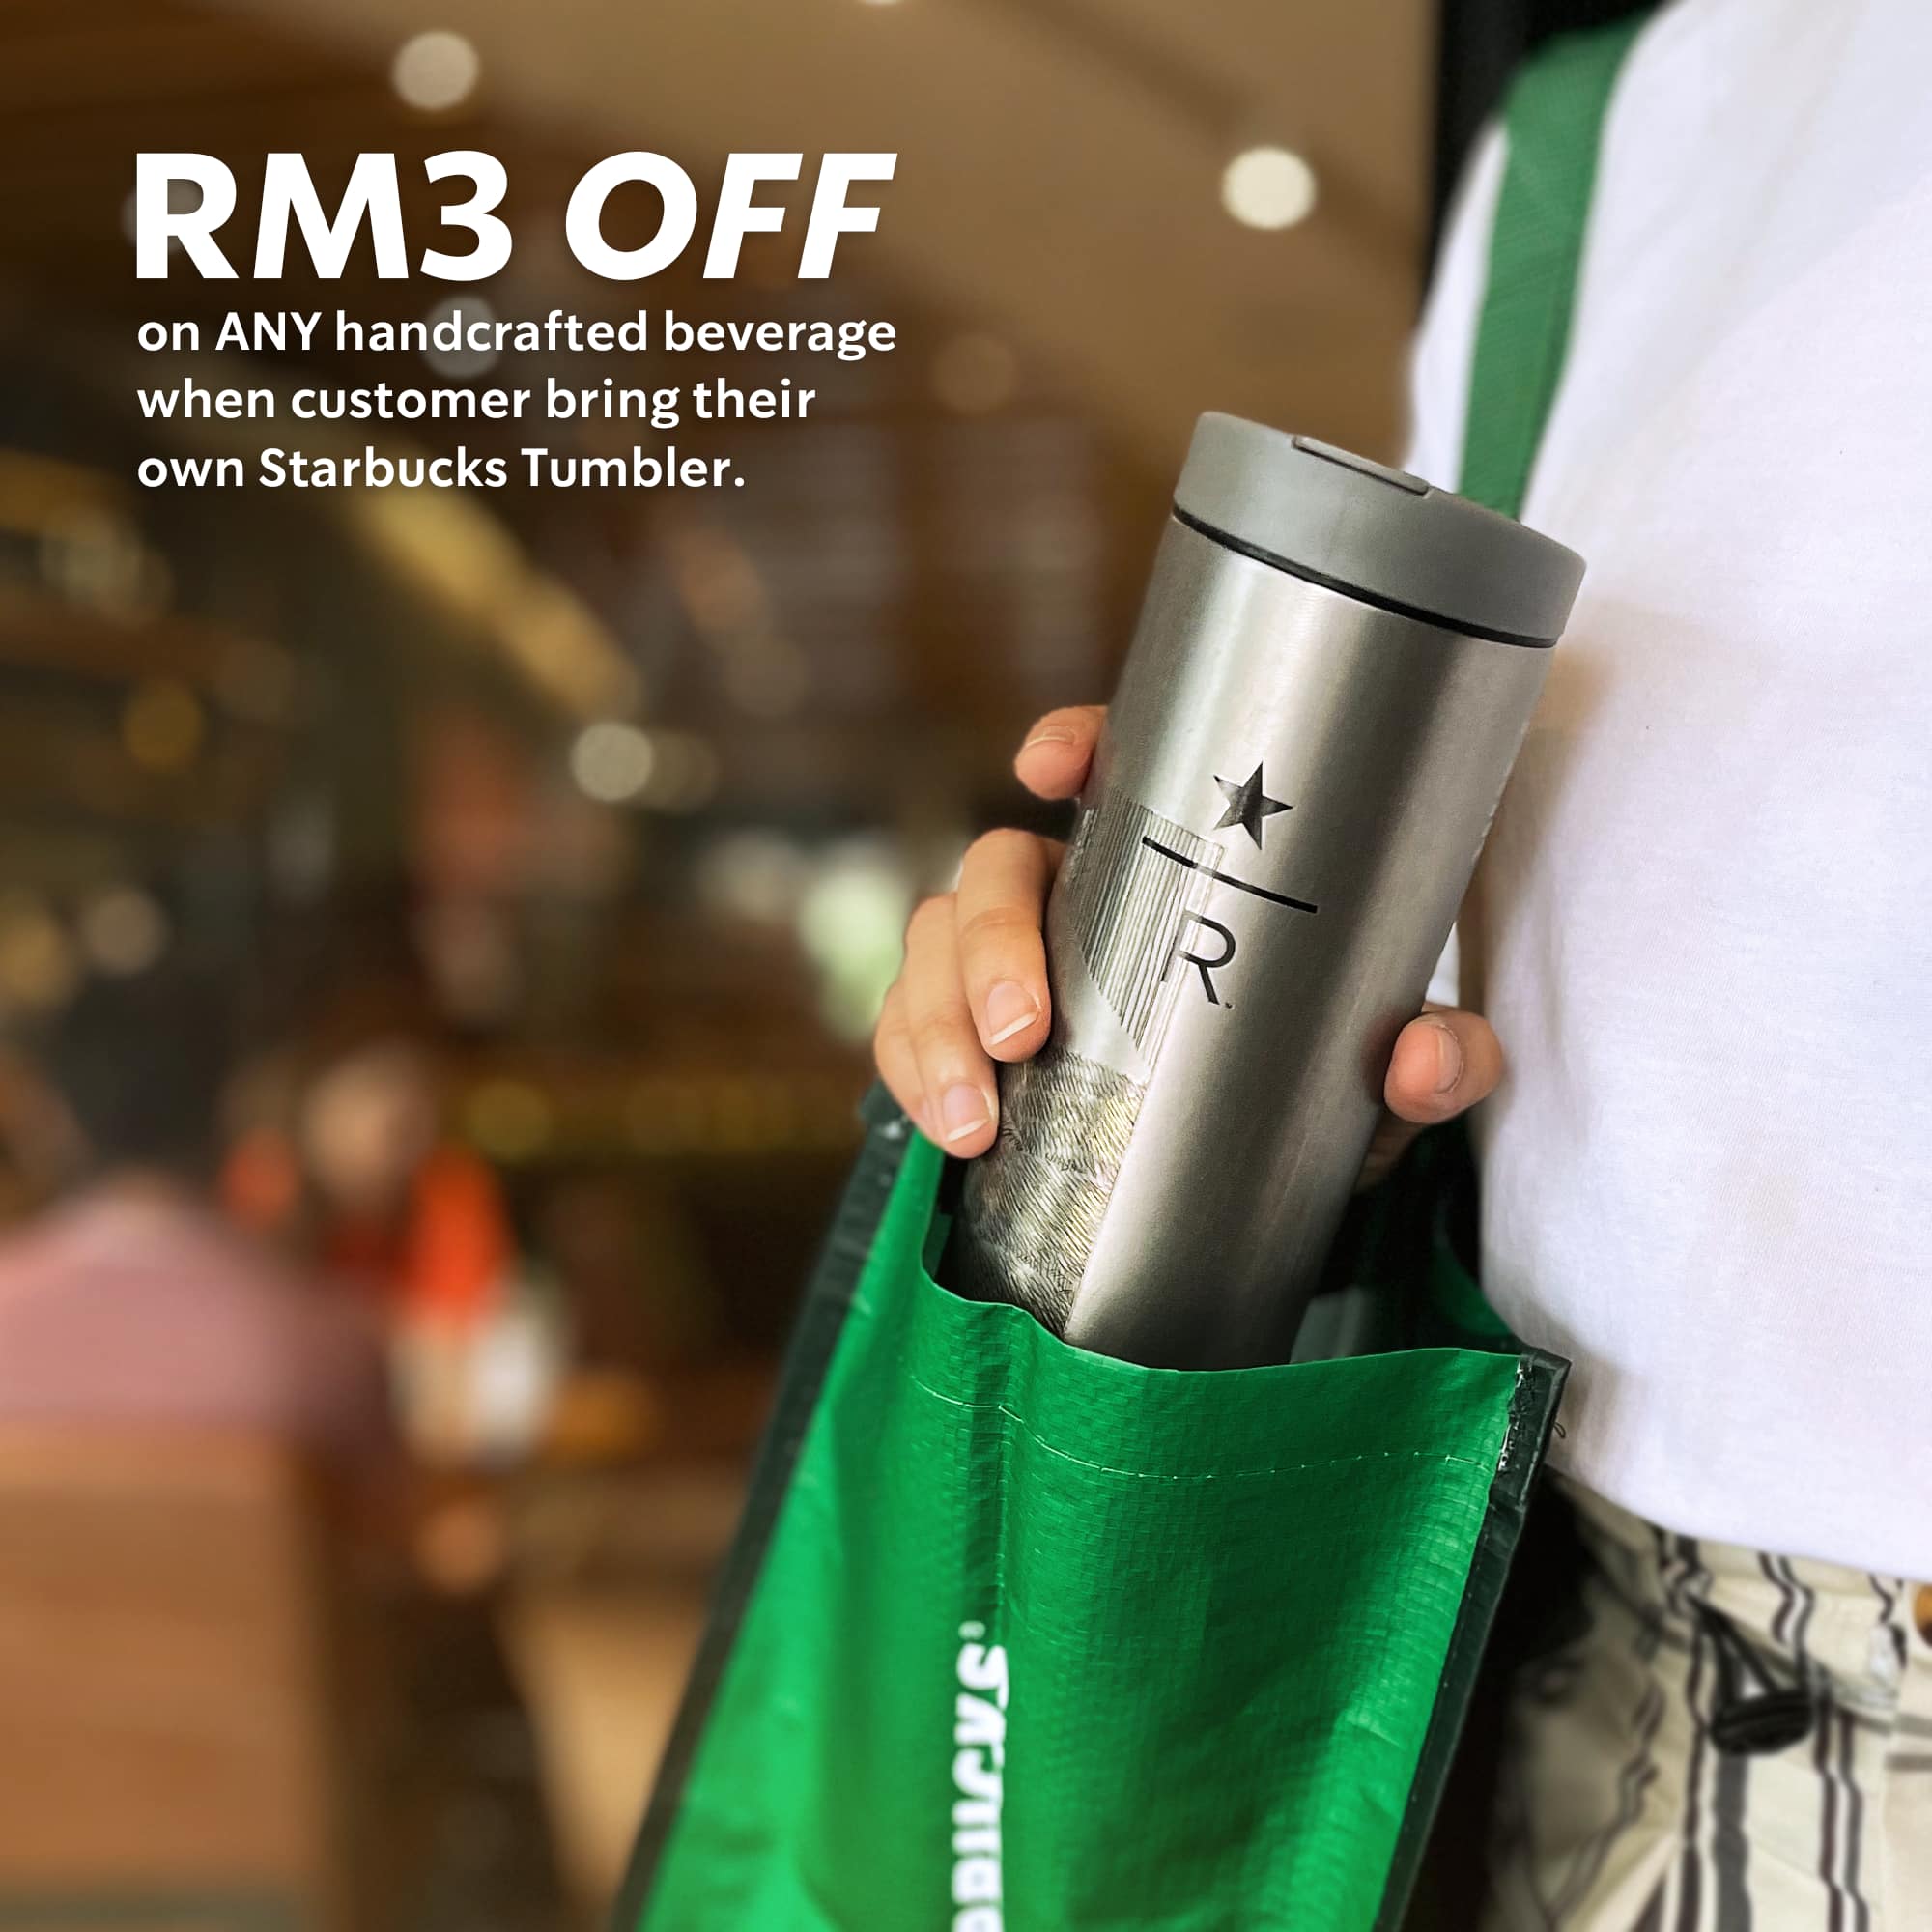 RM3 Off on Drinks with Own Starbucks Tumbler